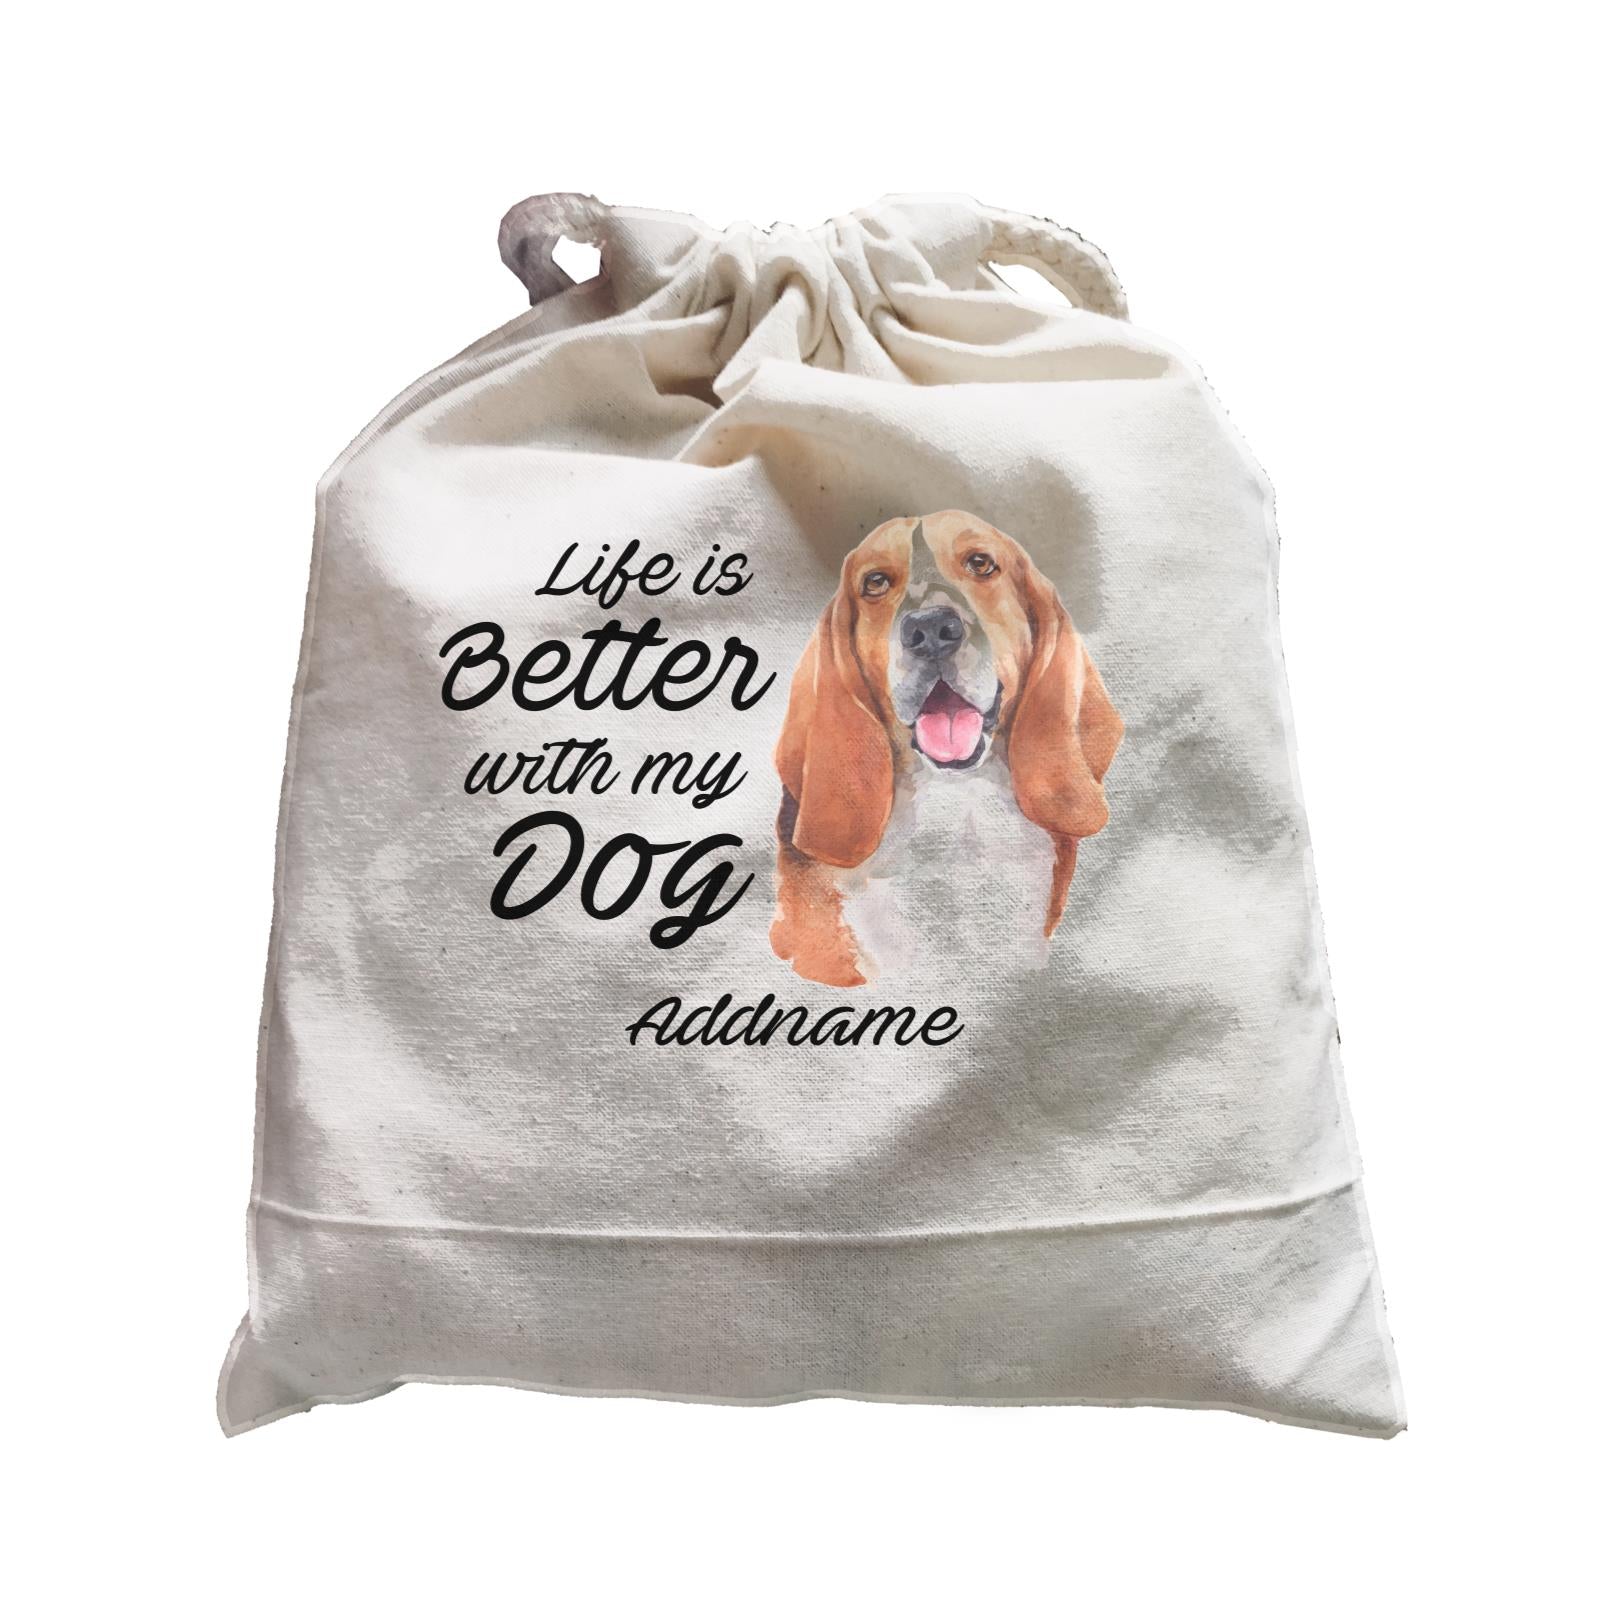 Watercolor Life is Better With My Dog Basset Hound Addname Satchel